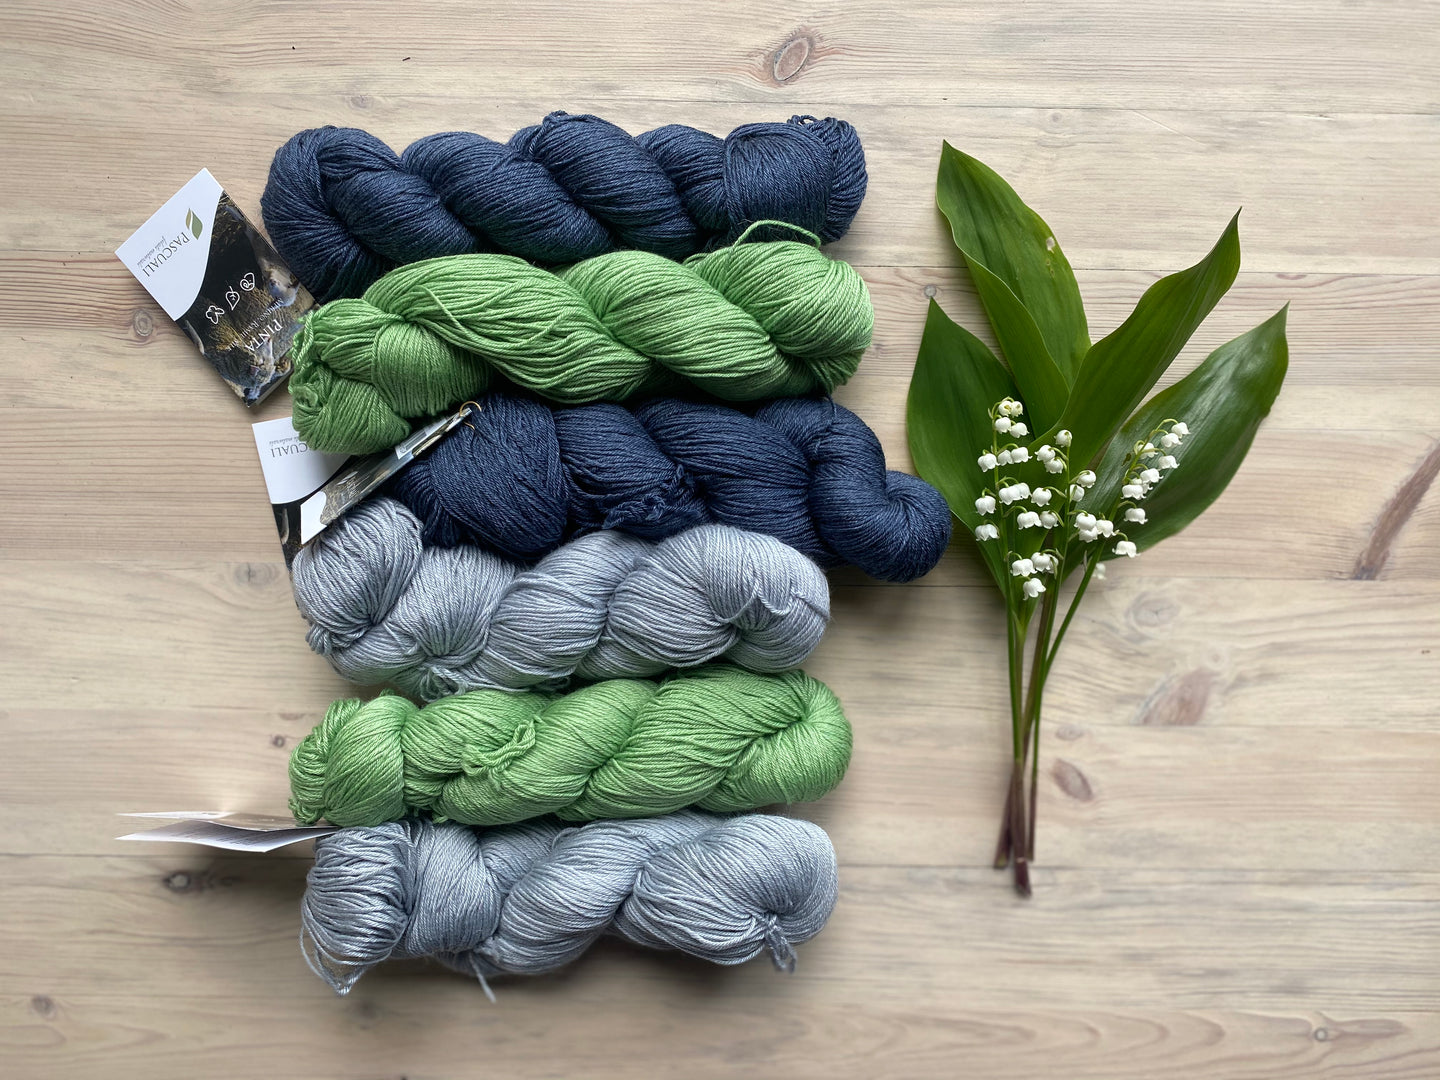 Welcome to our online yarn shop!